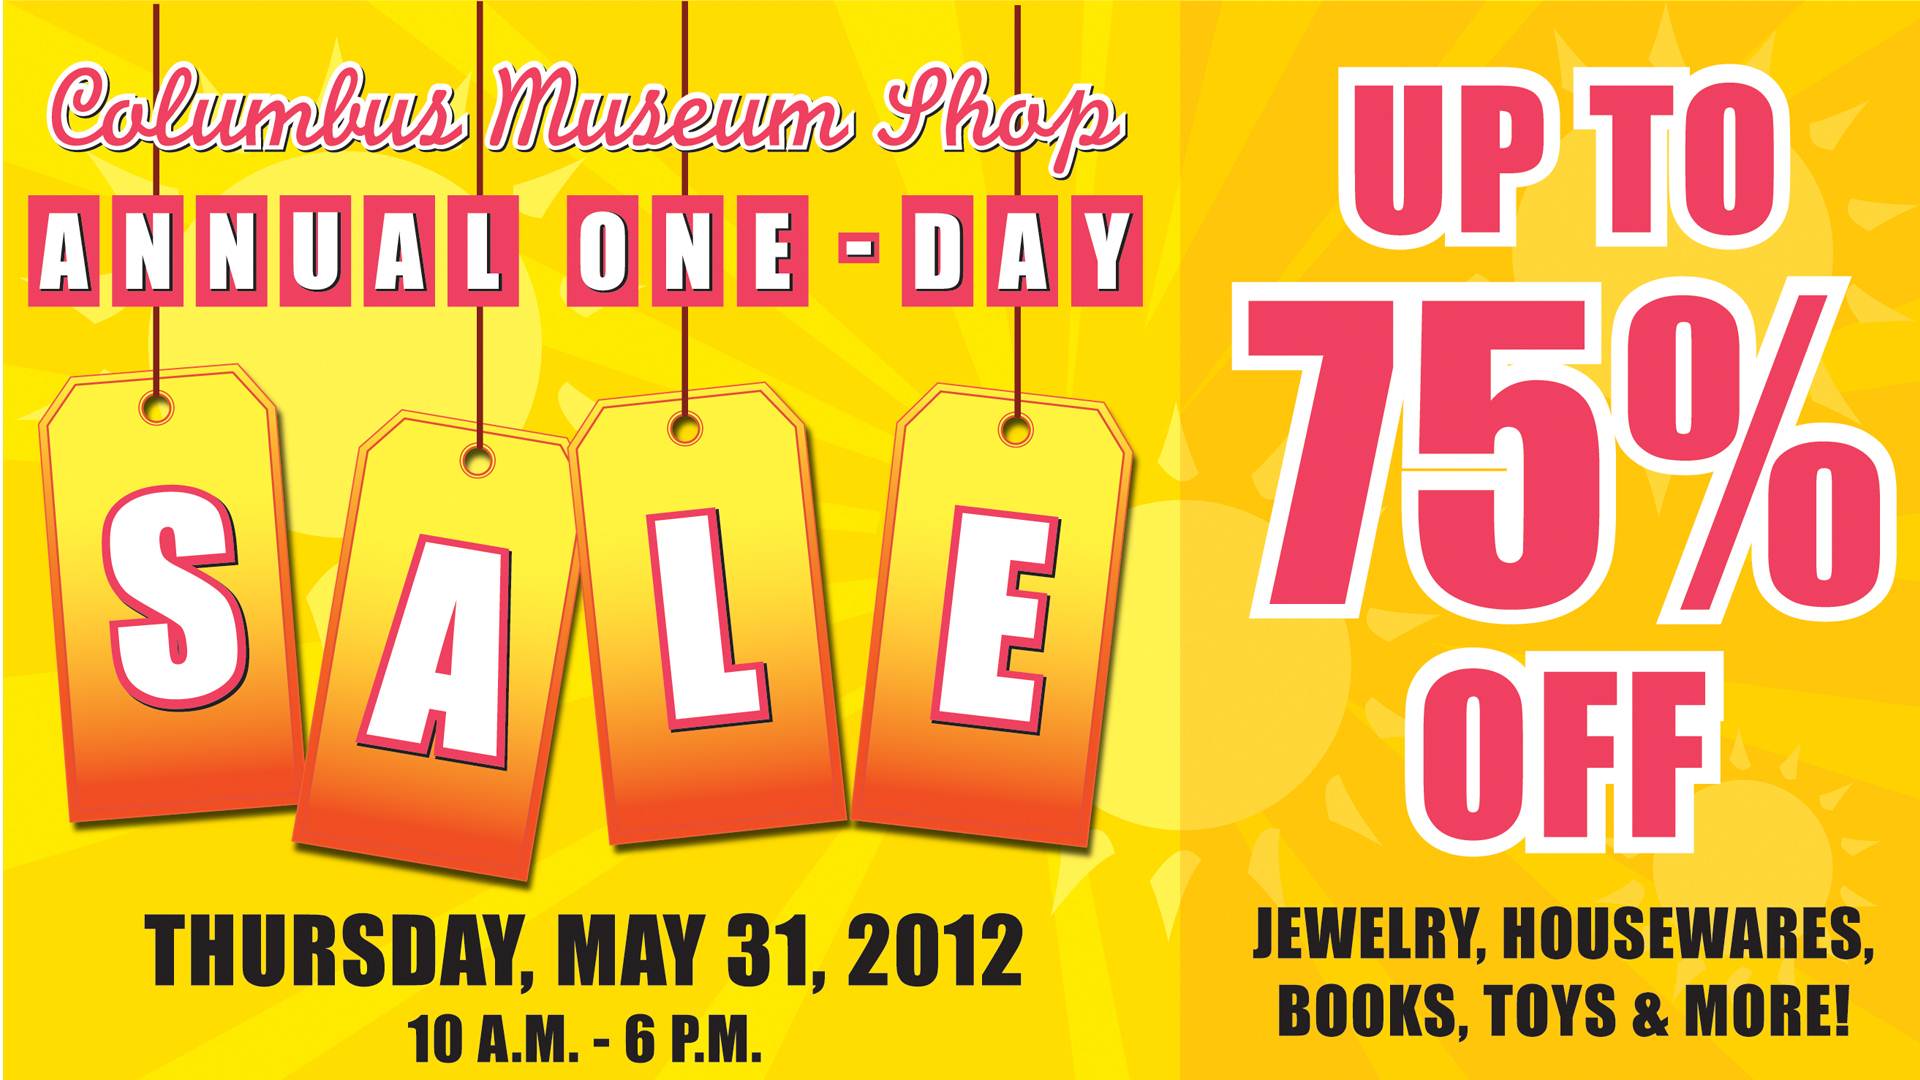 The Columbus Museum Shop Annual One-Day Sale